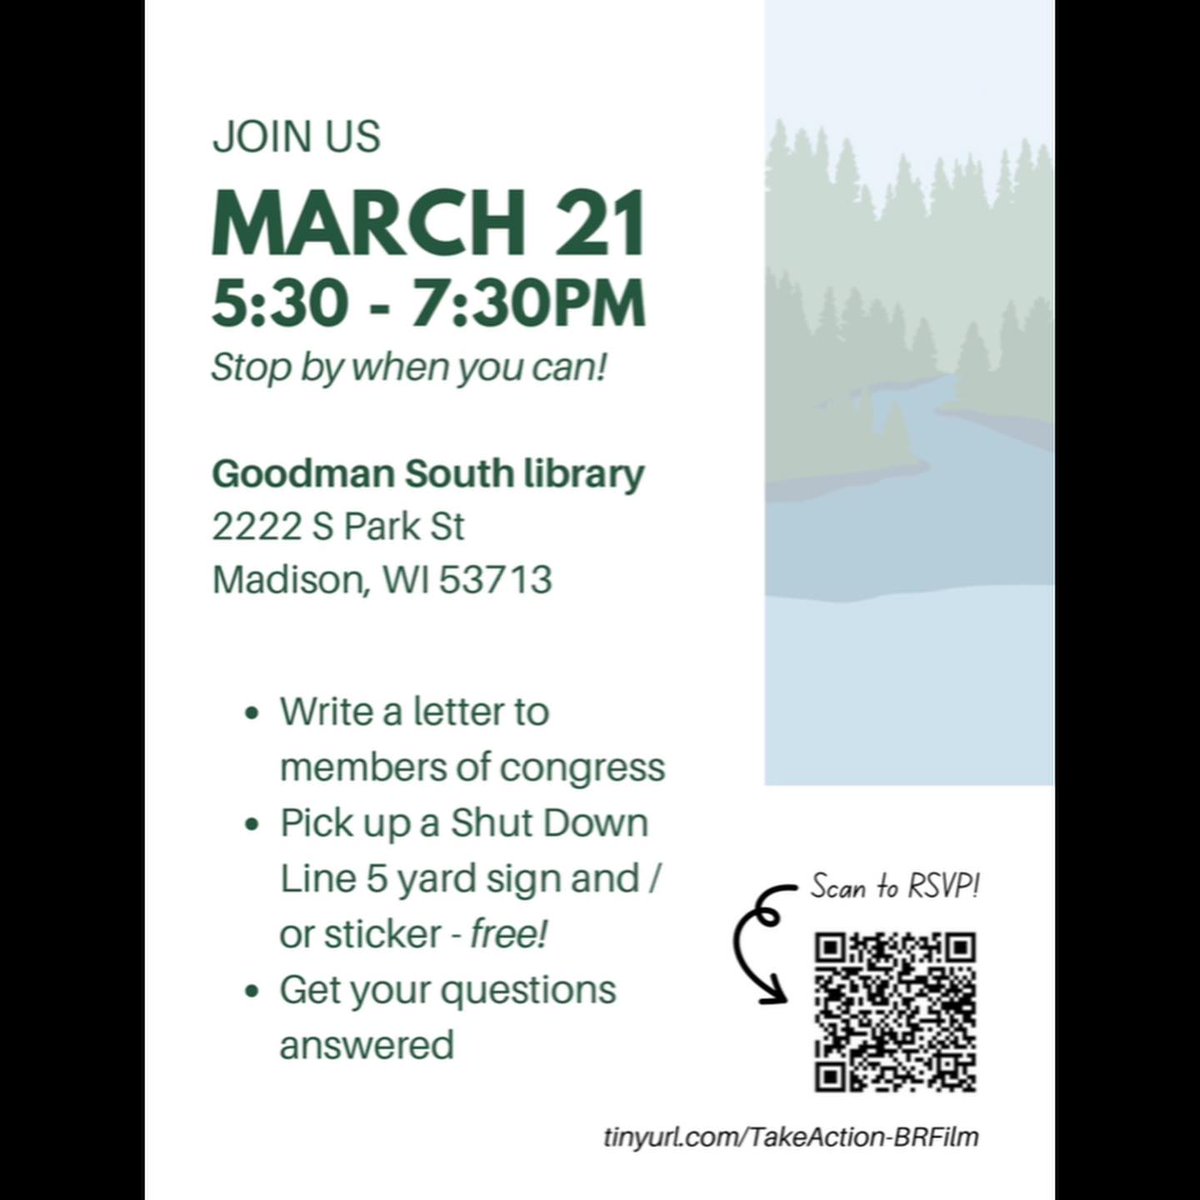 The documentary film “Bad River” is in select theaters! If you’re in Madison, join us next Thursday, March 21st, at Goodman South Library, any time between 5:30-7:30pm to take action to #ShutDownLine5 You can donate to support the Bad River Band here: defendthebadriver.org